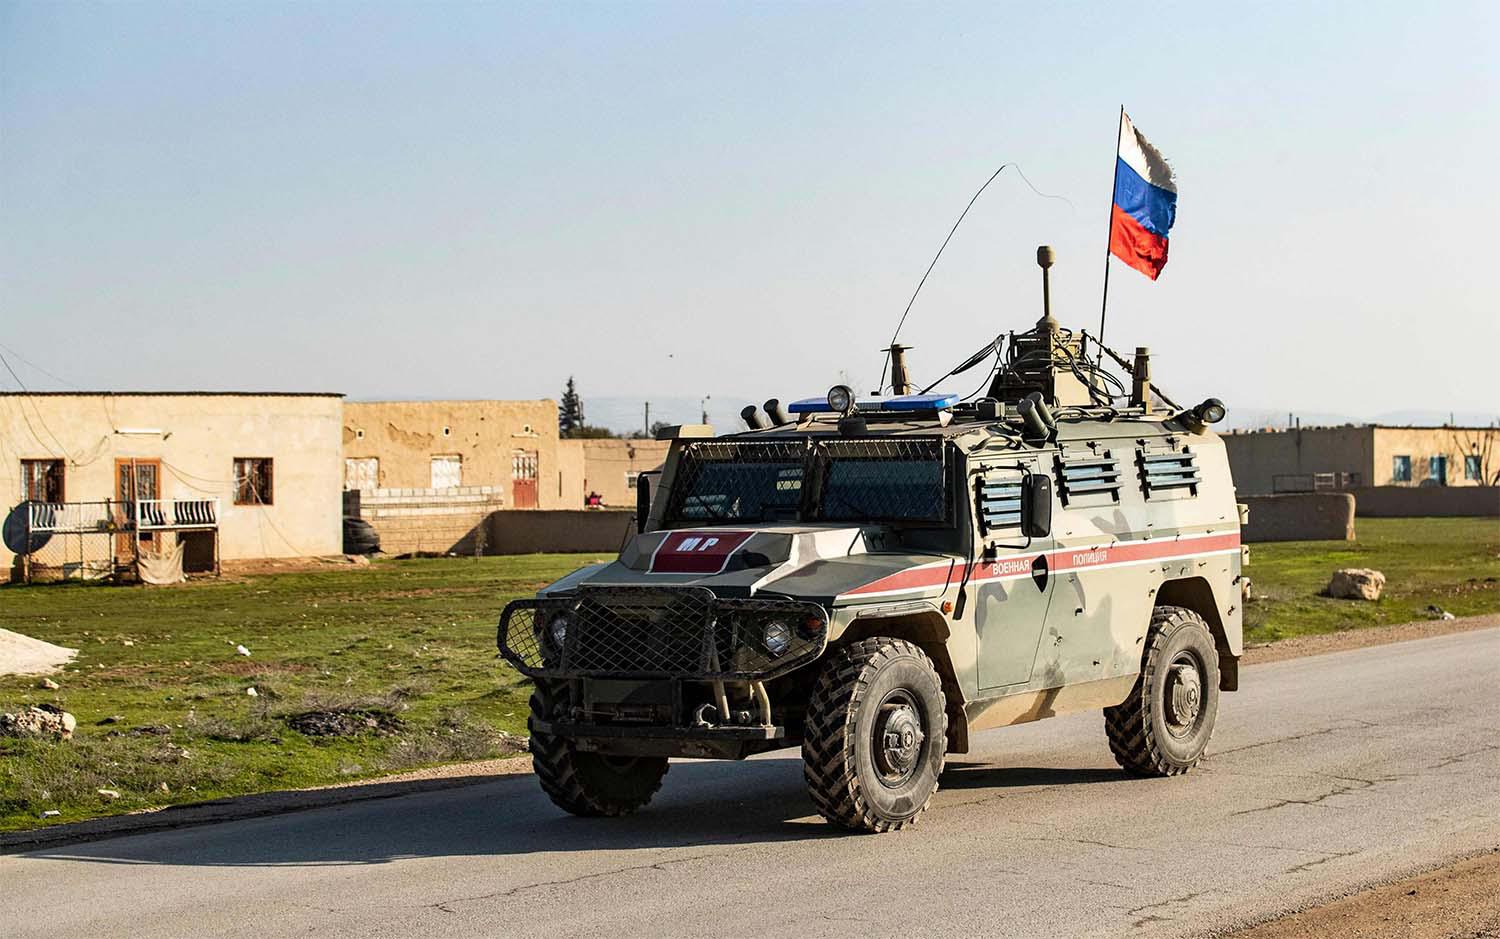 A Russian military police vehicle drives through the town of Darbasiyah in Syria's northeastern Hasakeh province